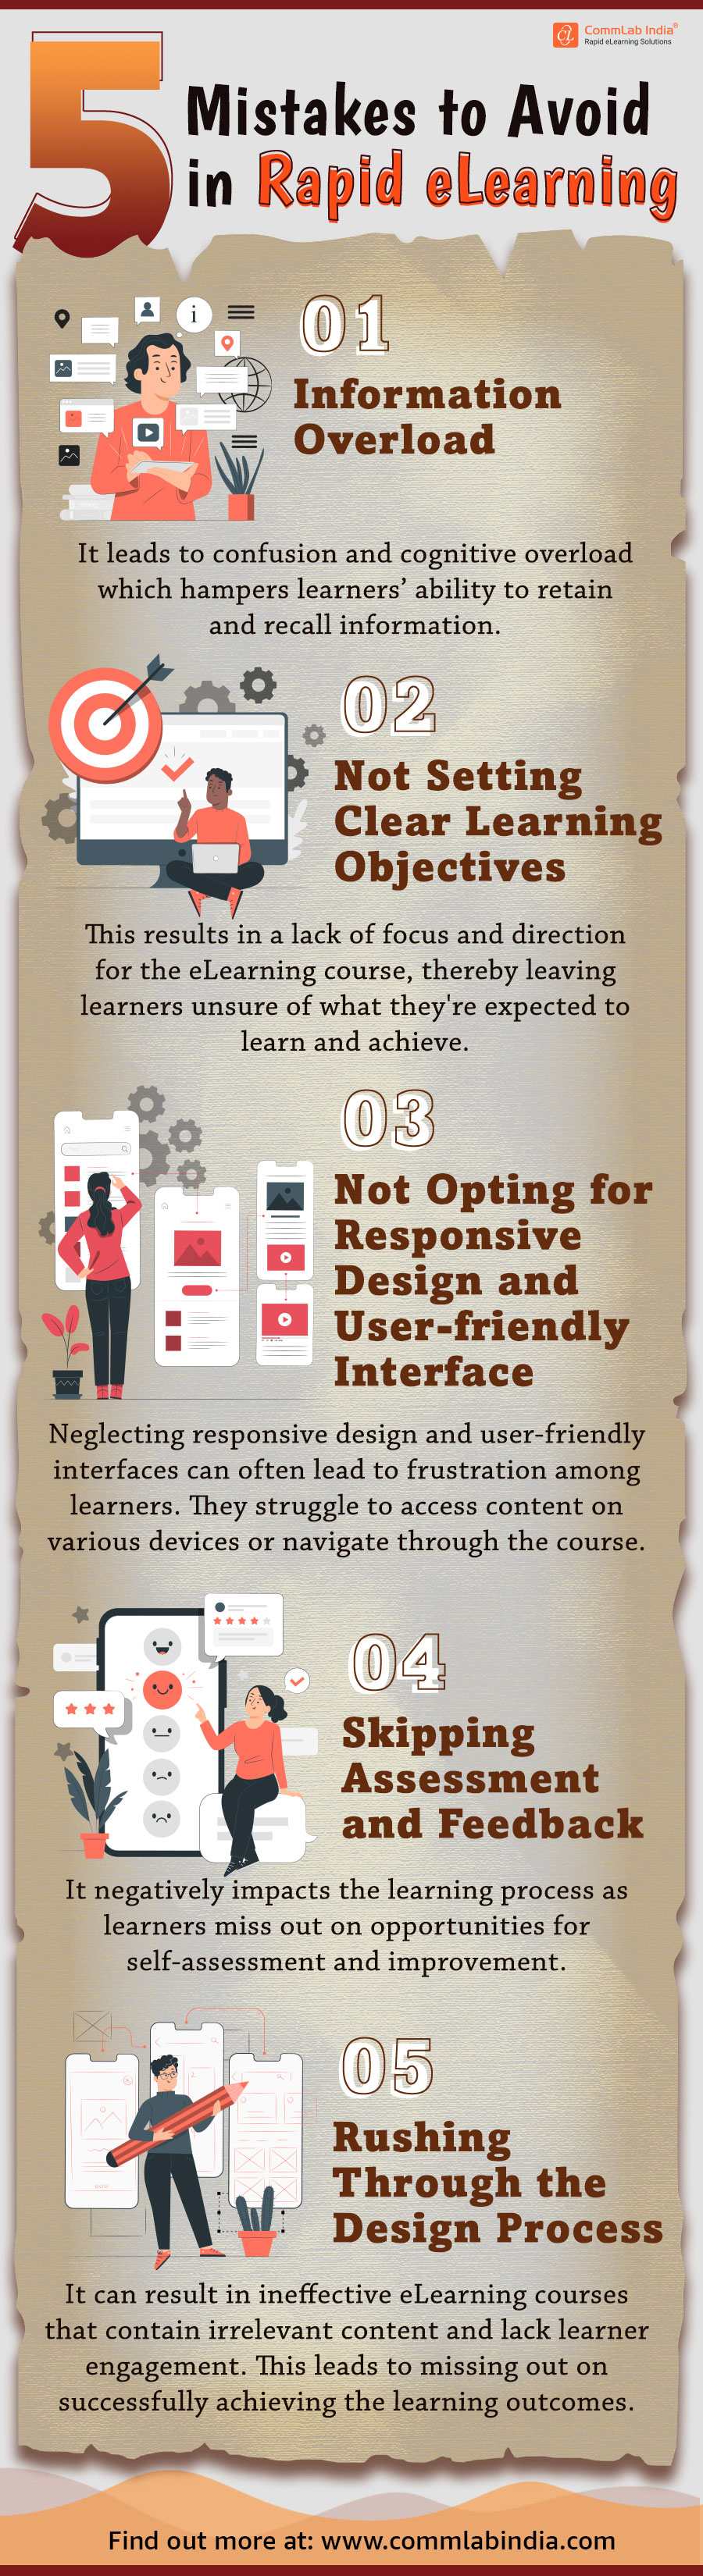 5 Mistakes to Avoid in Rapid eLearning Design and Development